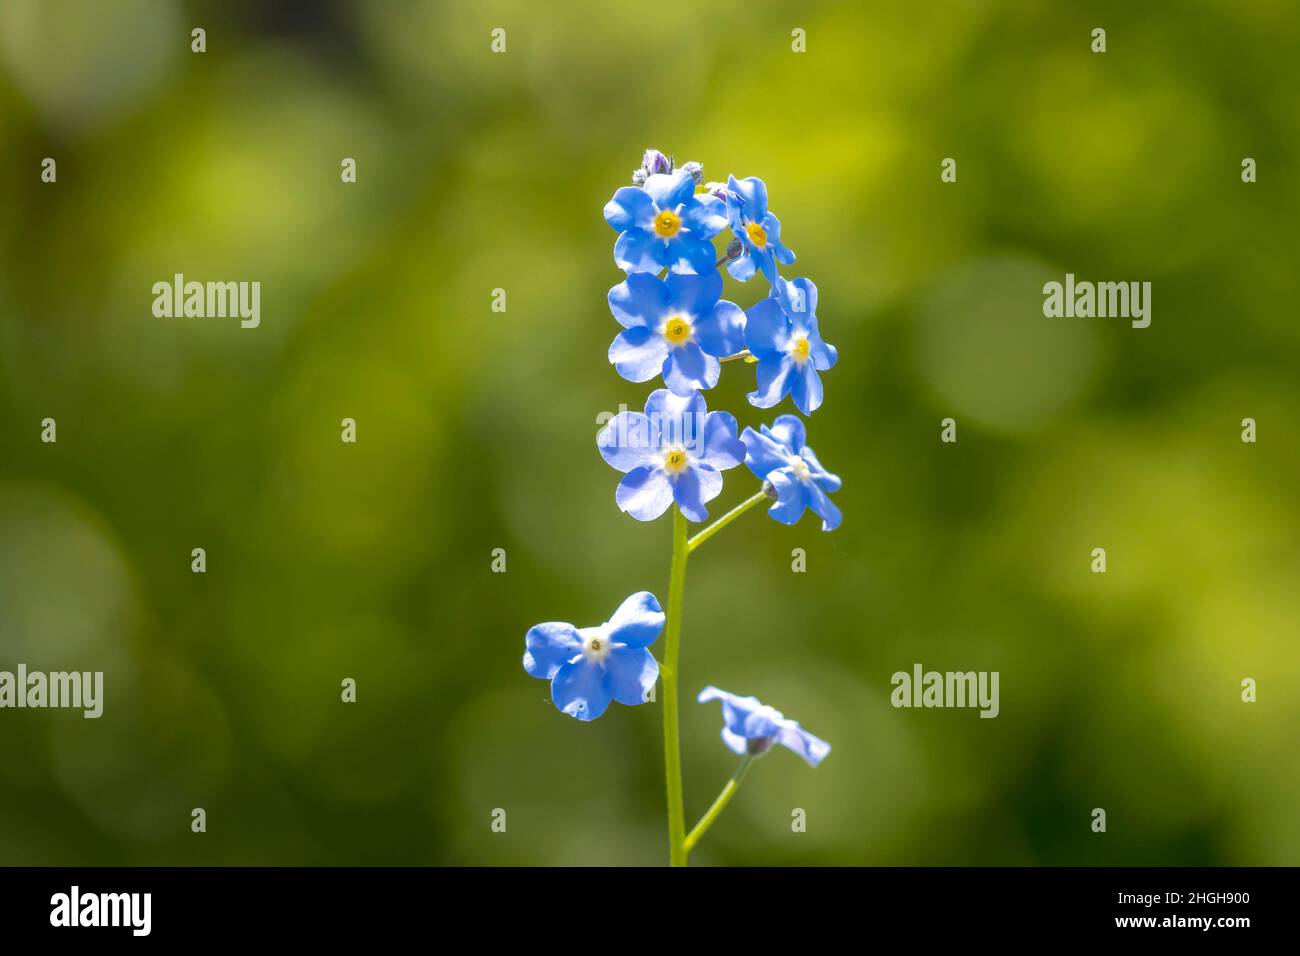 Closeup of Veronica chamaedrys, the germander speedwell, bird's-eye speedwell, or cat's eyes, blue flowers blooming. Stock Photo